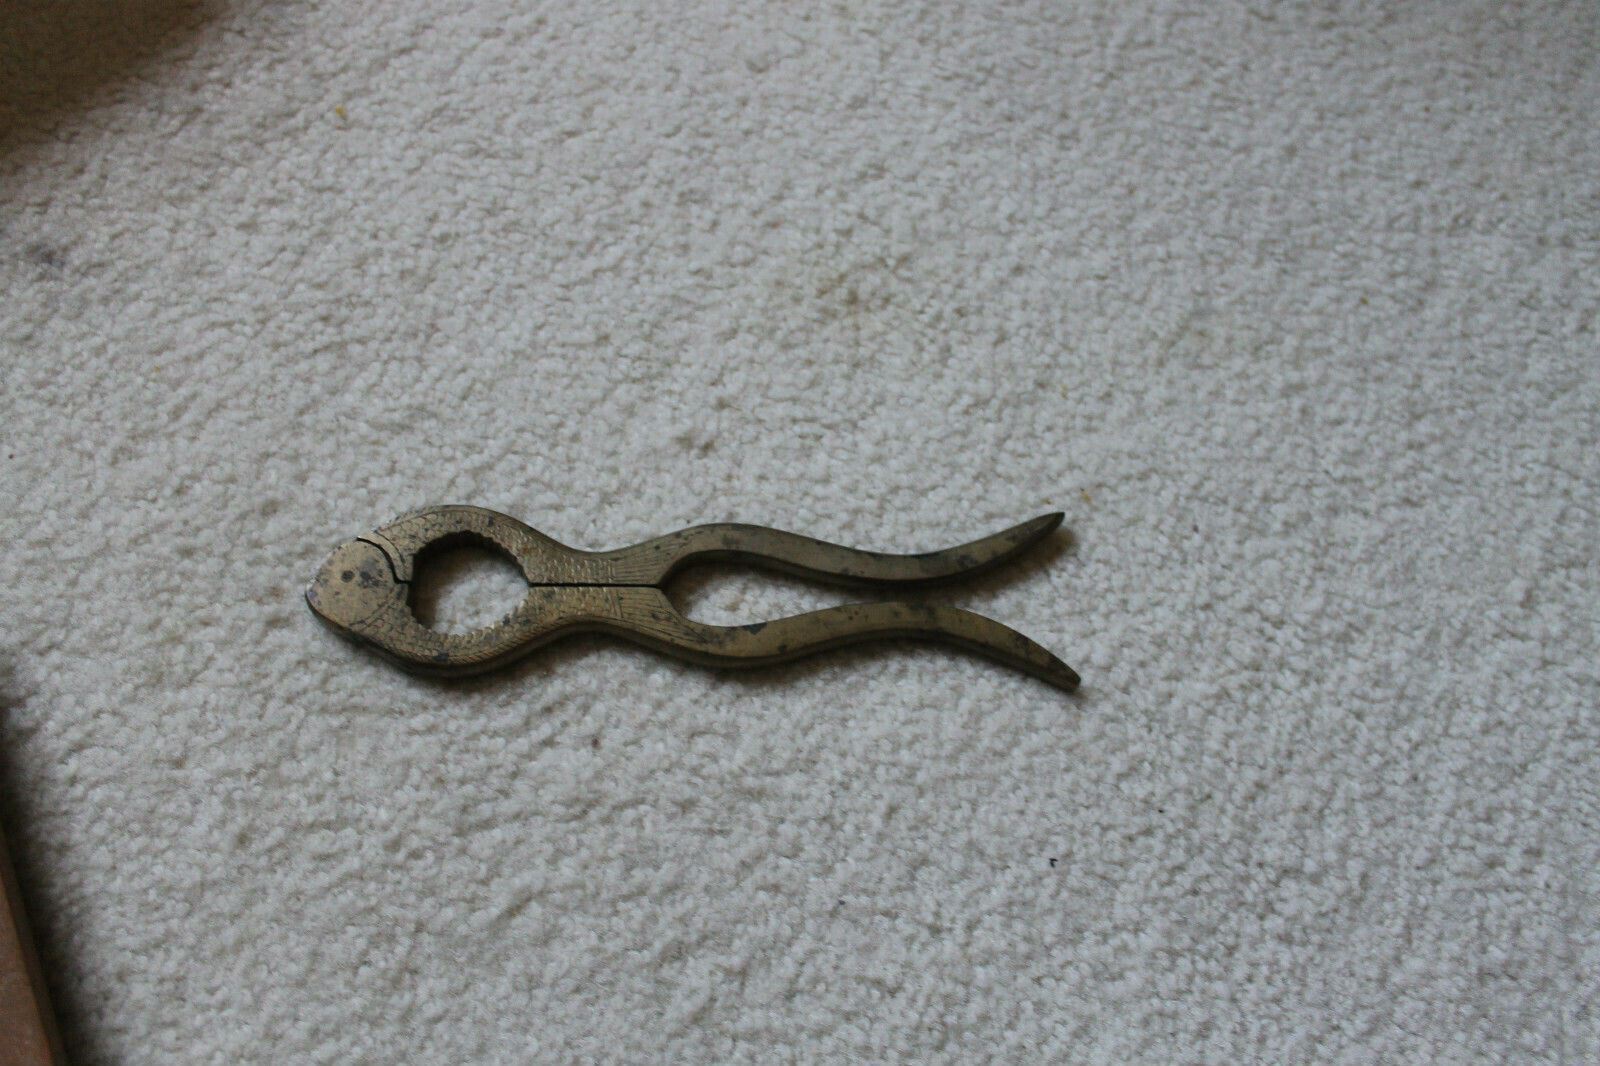 Antique Chinese brass walnut cracker with a fish shape -1920s